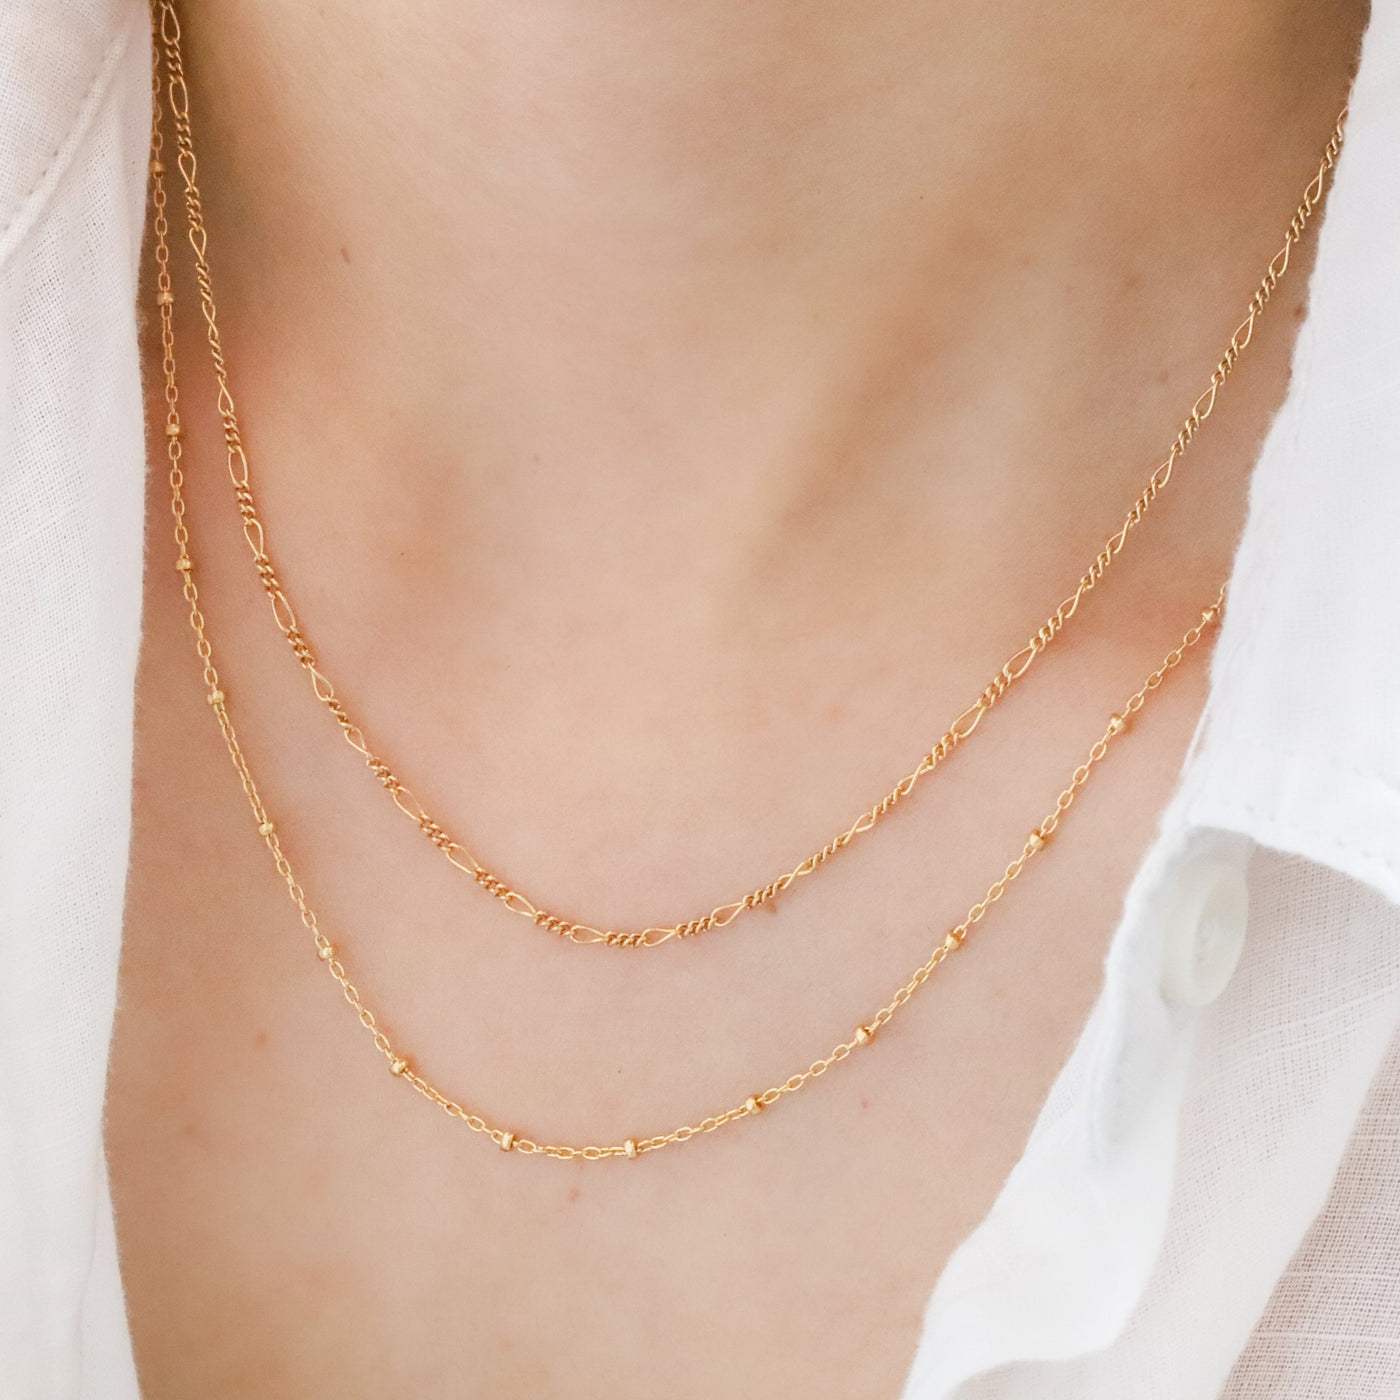 Gold layered chain necklaces